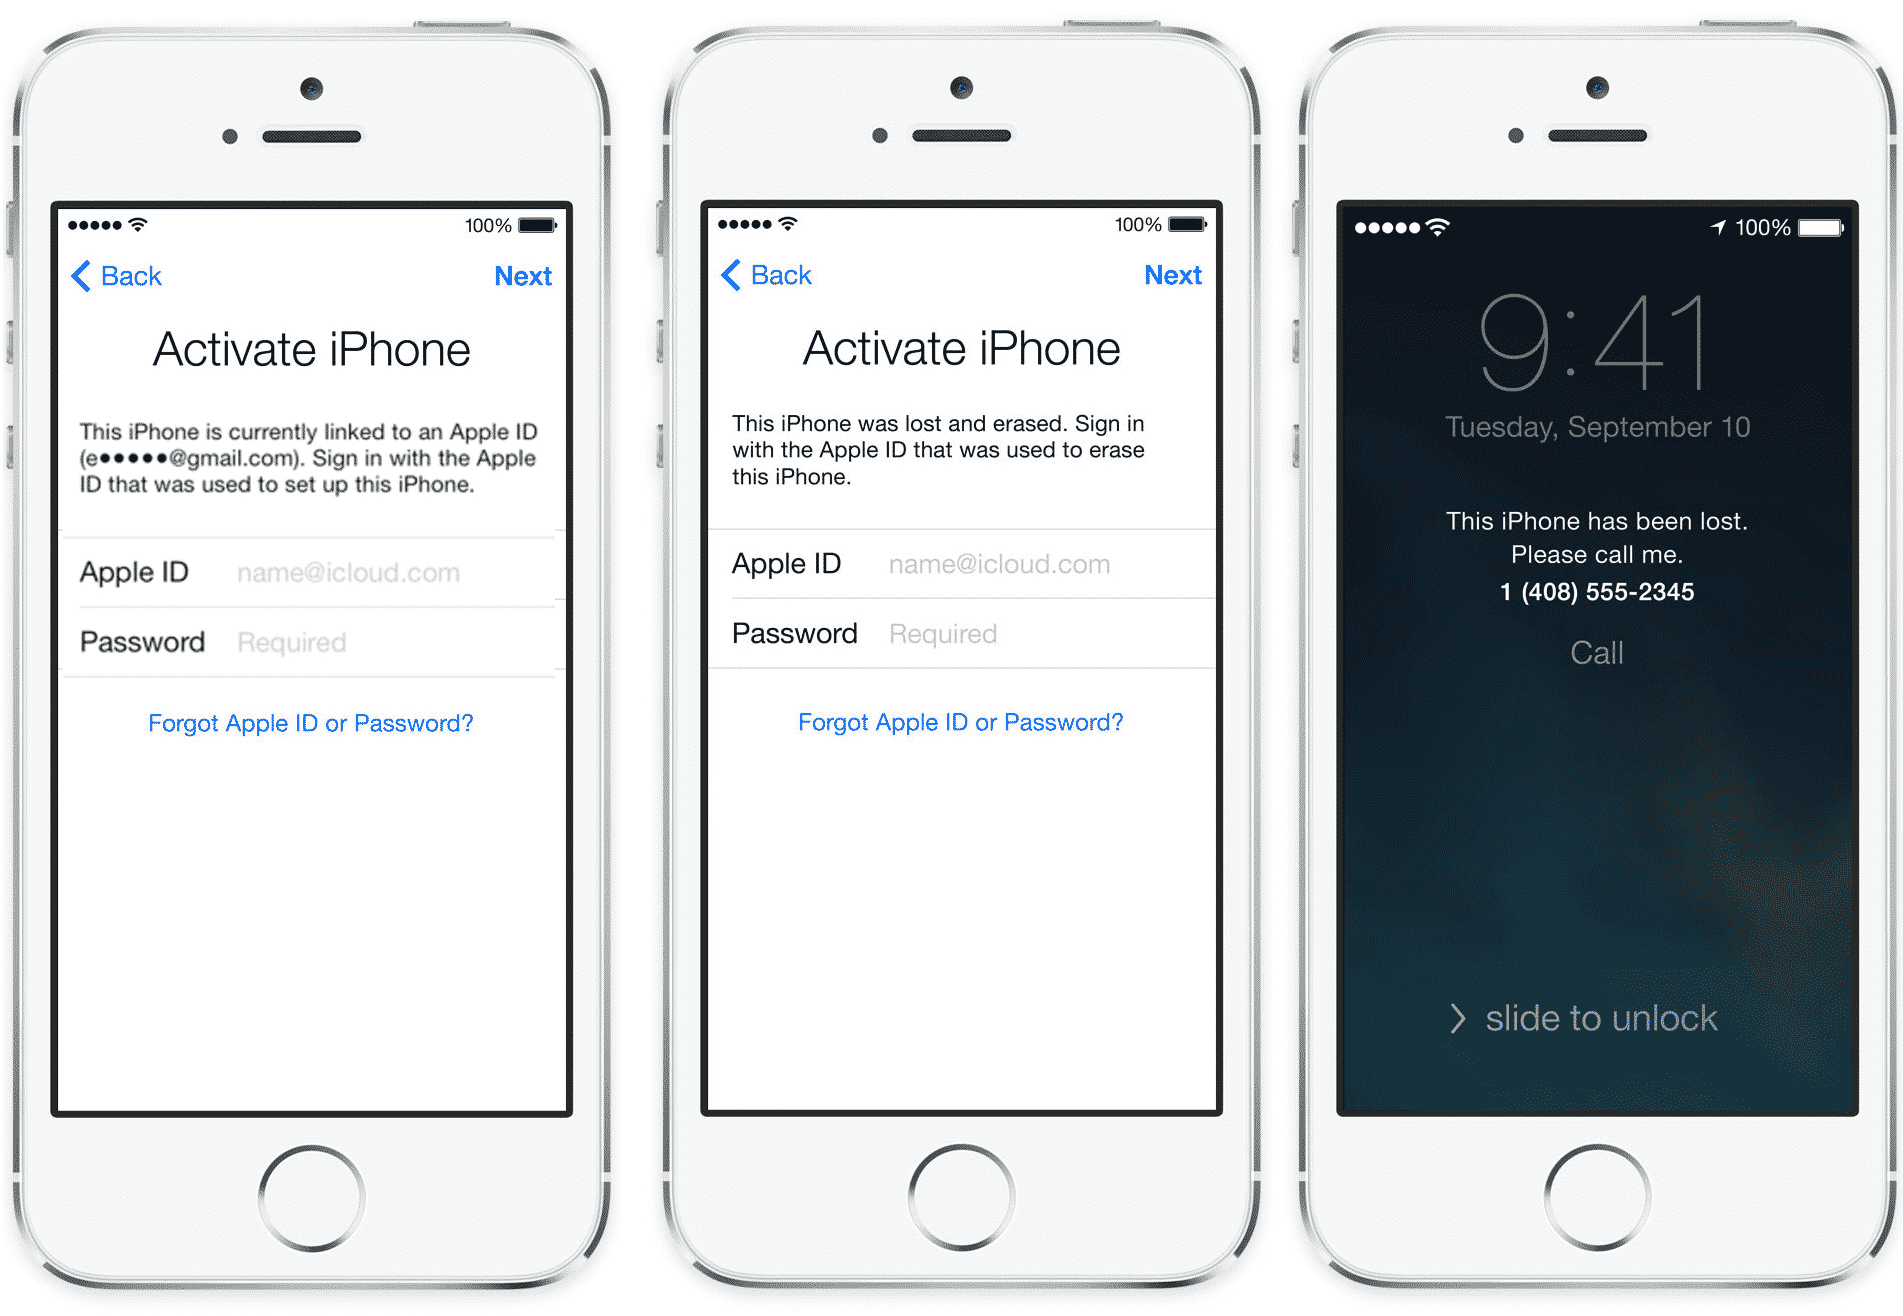 How To Unlock iPhone From A Previous Owner’s Apple ID